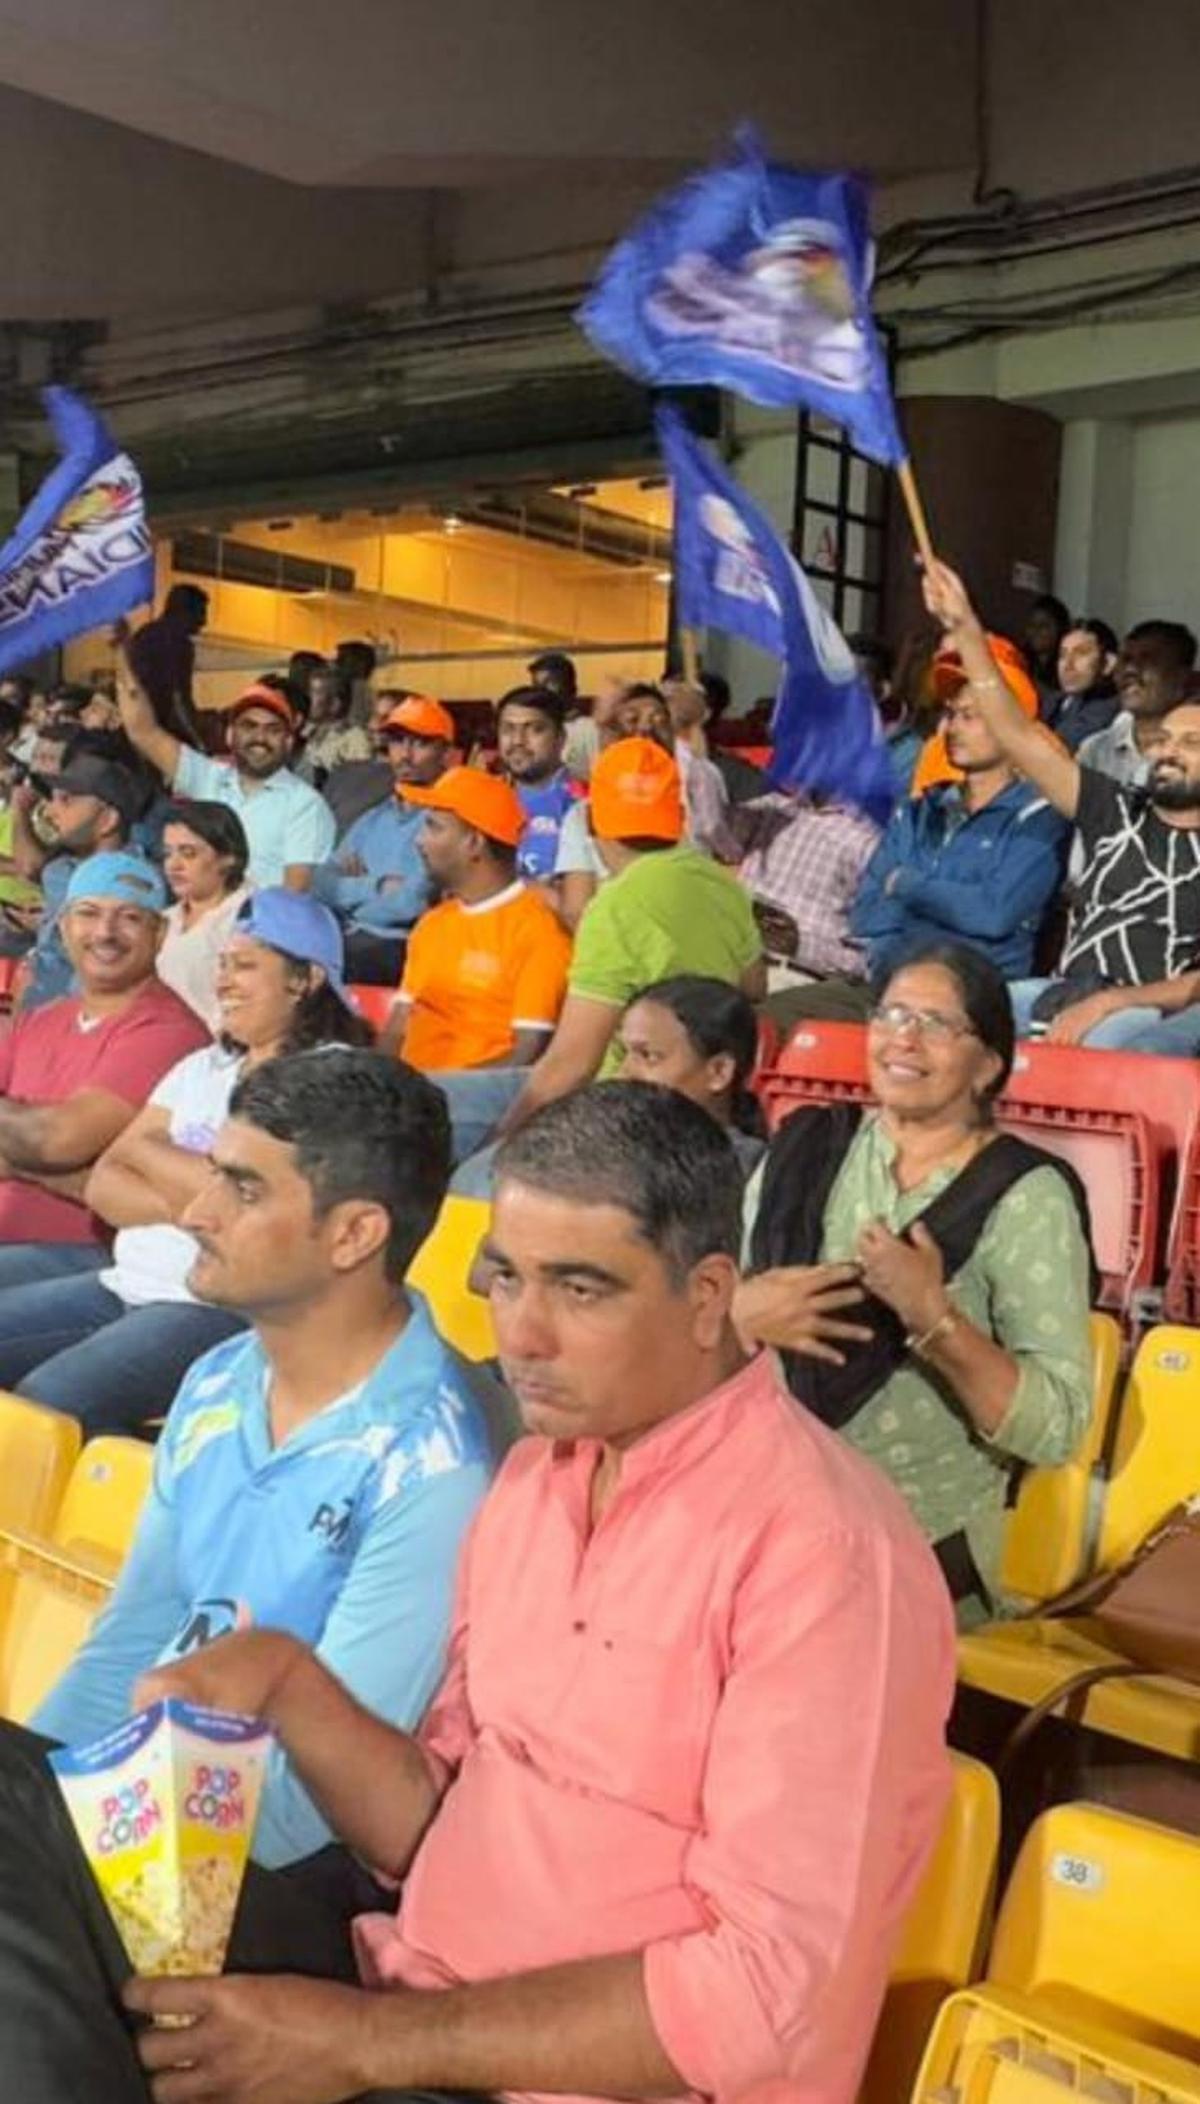 Elsamma, Anumol and a few family members were at the M. Chinnaswamy Stadium when Mumbai Indians and Delhi Capitals kicked off season two of the WPL.